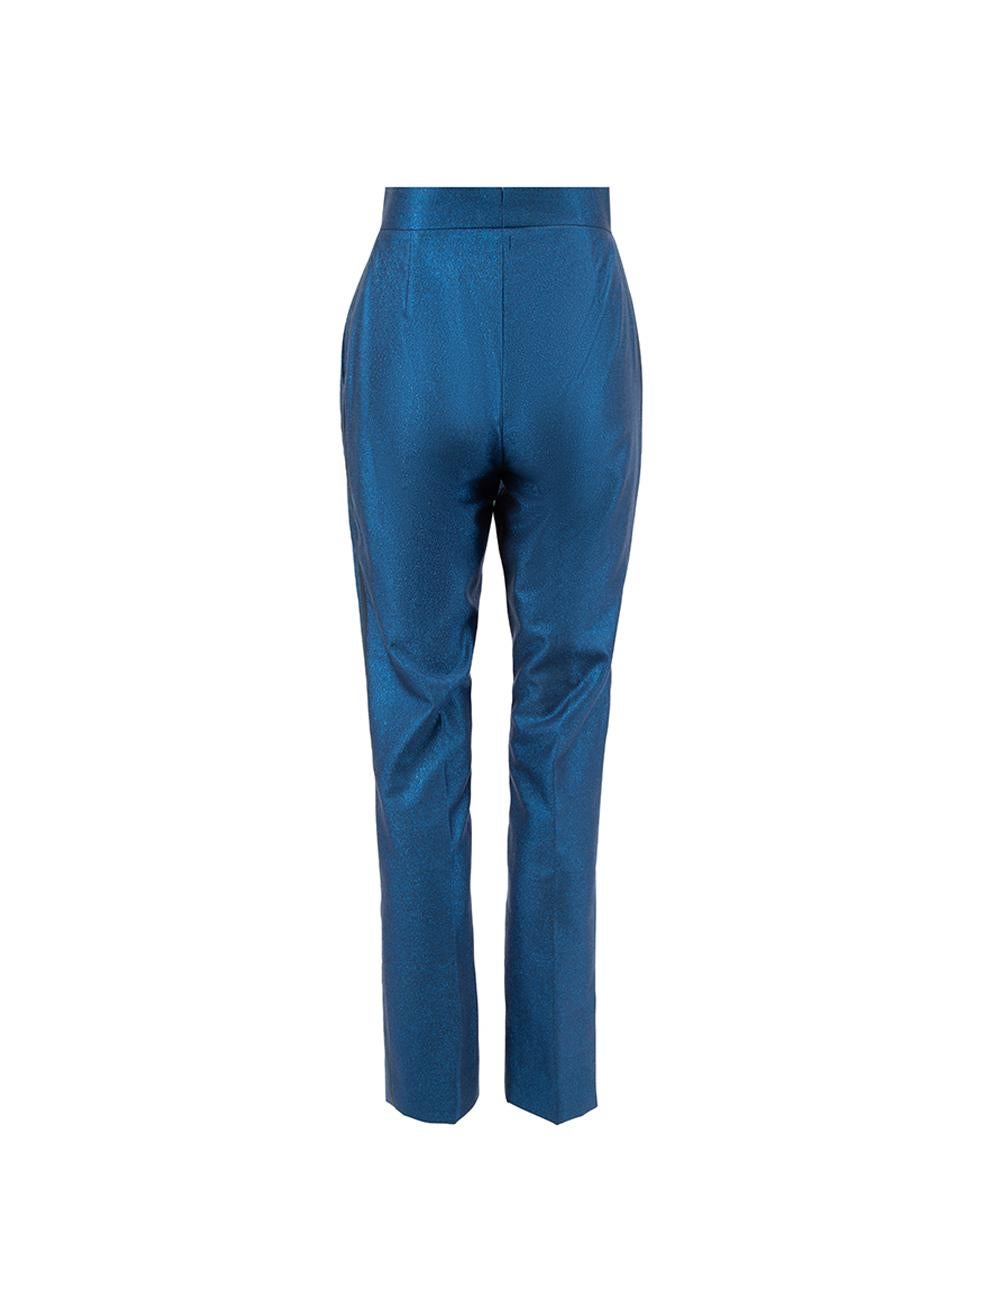 Sanne Women's Metallic Blue Straight Leg Trousers In New Condition For Sale In London, GB